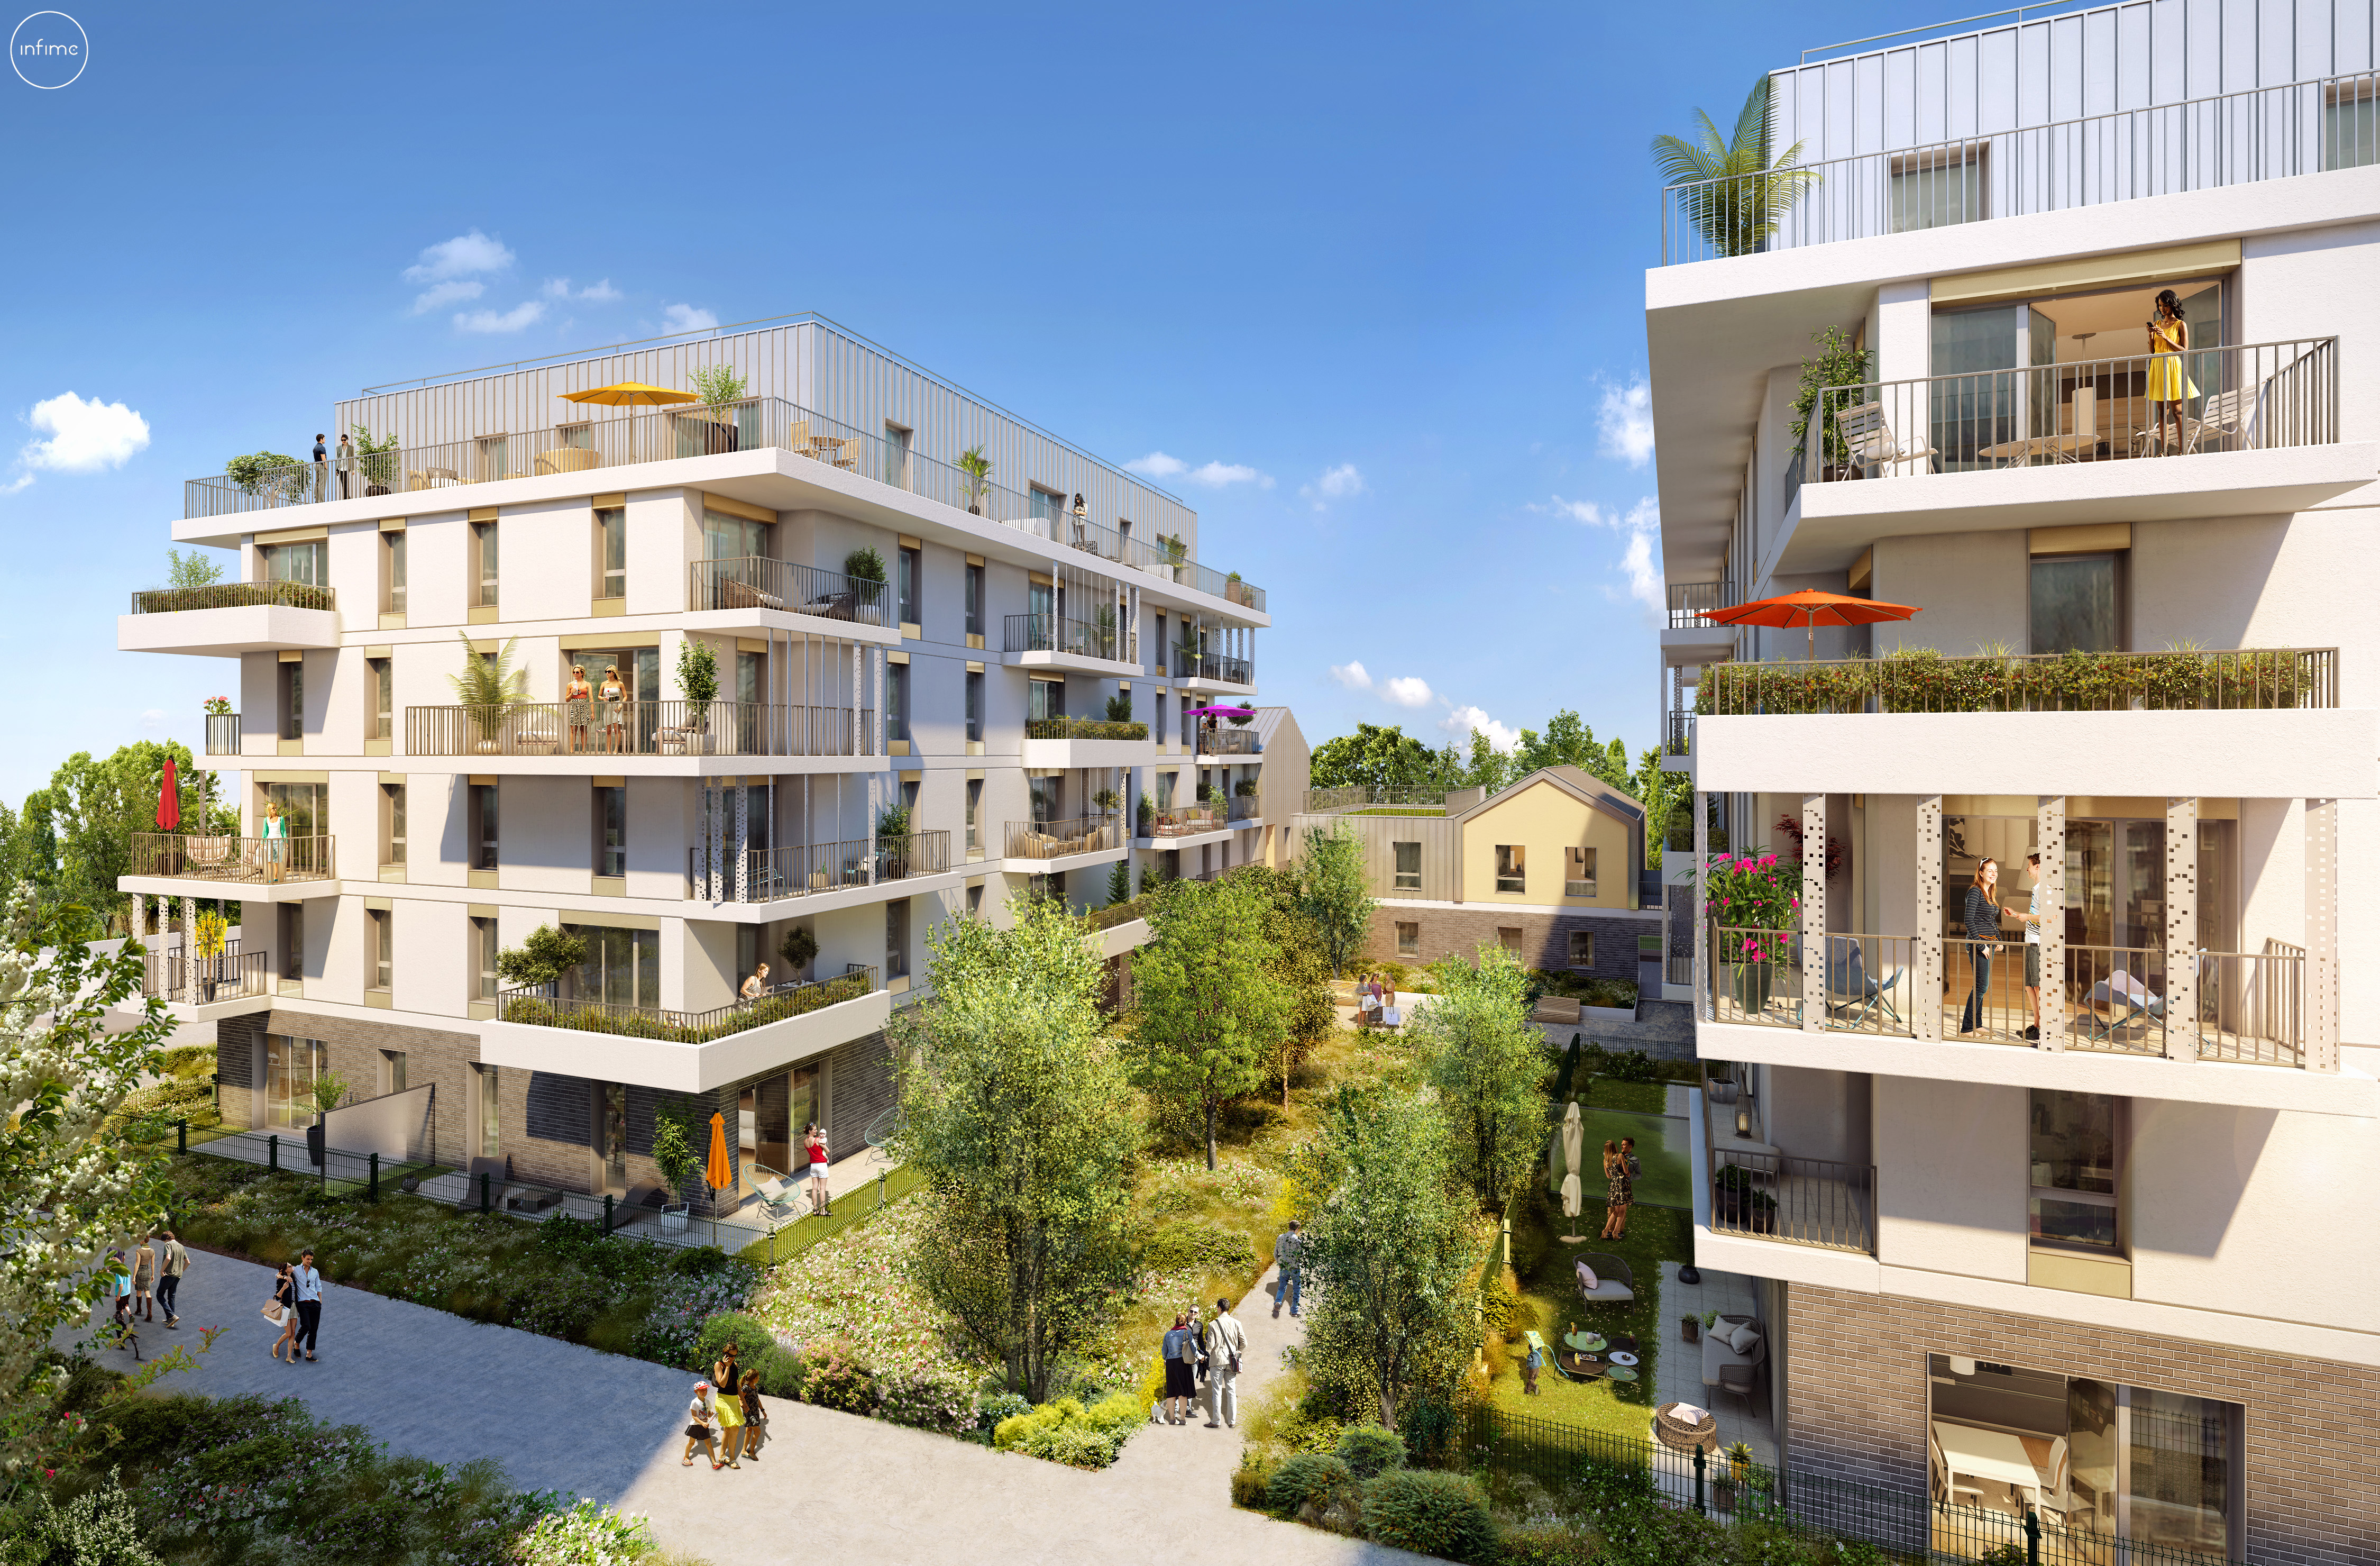 Rueil-Malmaison: Eiffage Immobilier sells nearly 200 sustainable housing units from «Ô Domaine» to CDC, In'li and Seqens